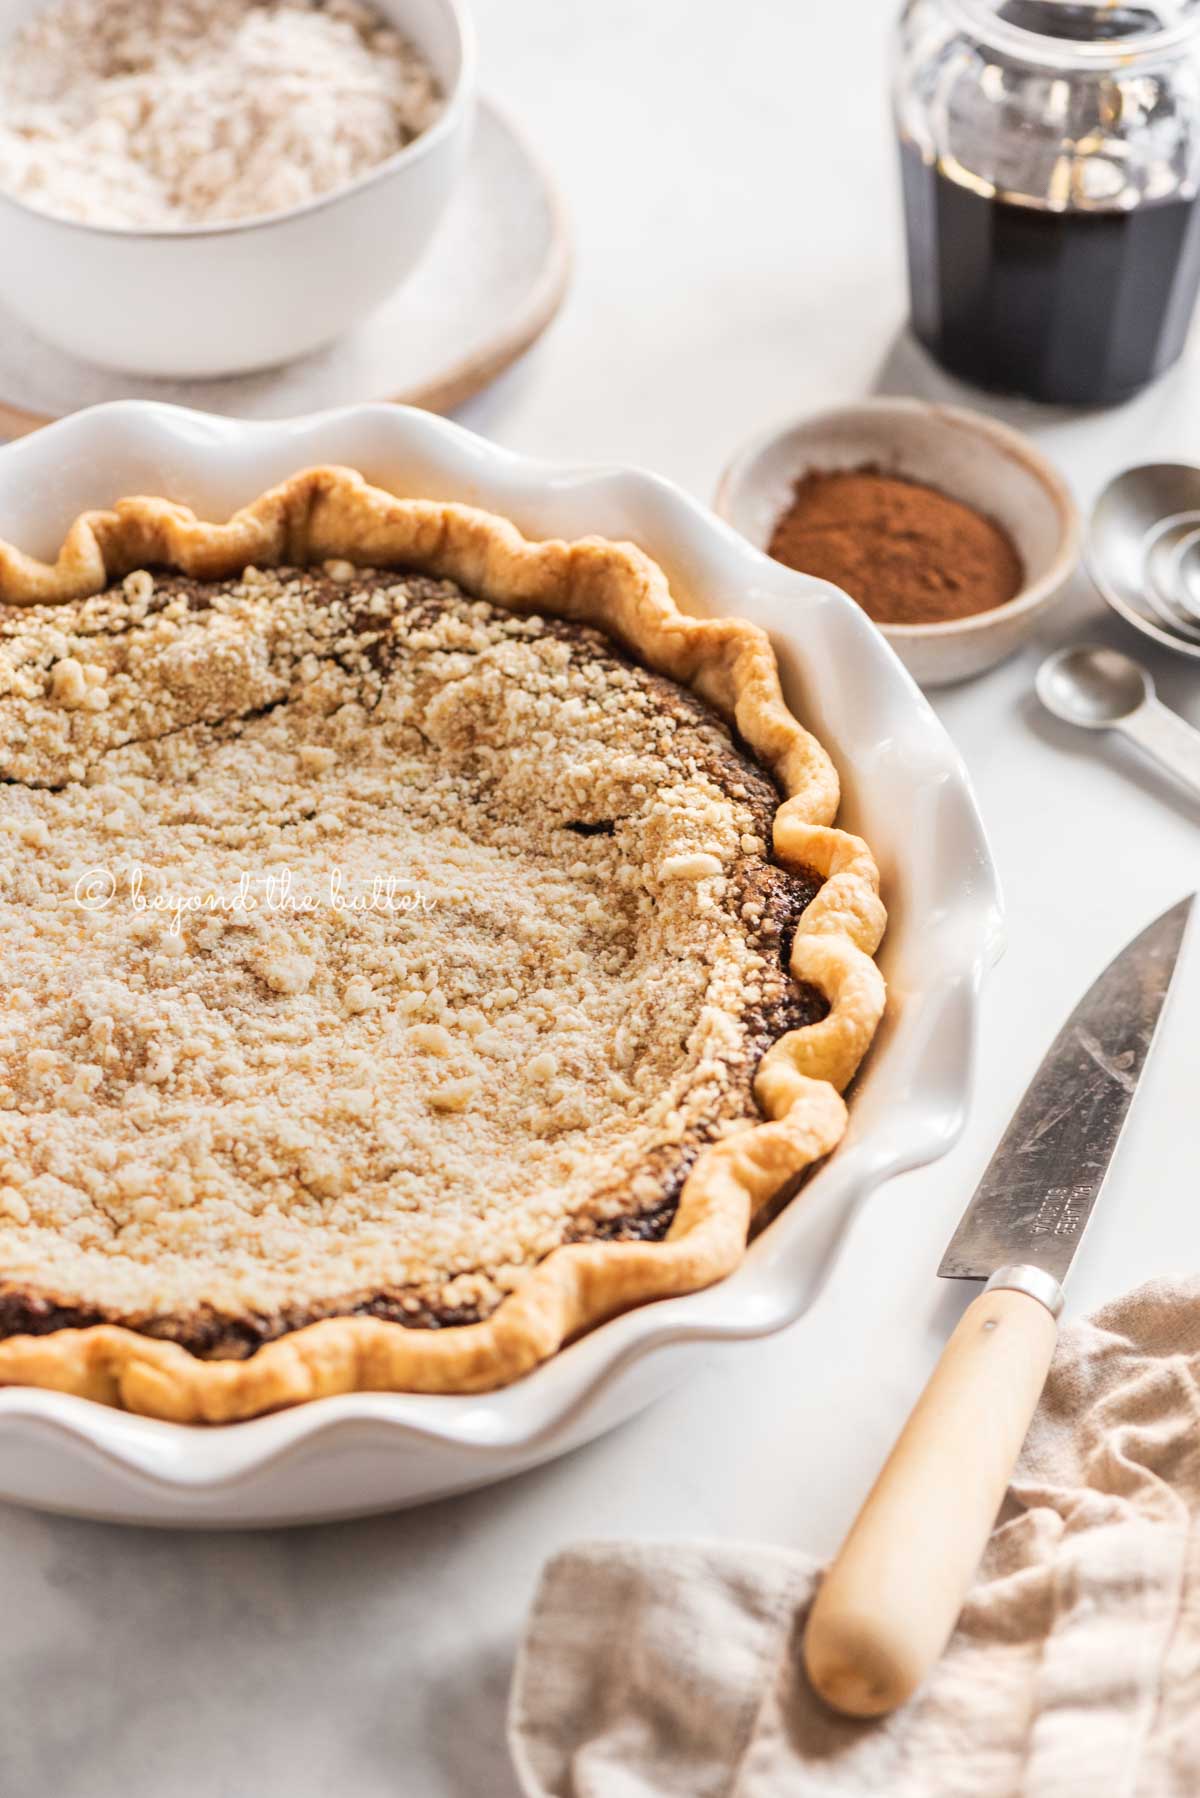 pie plate with uncut shoo fly pie with bowls of crumb topping and cinnamon above and a knife, measuring spoons, and molasses | All Images © Beyond the Butter™